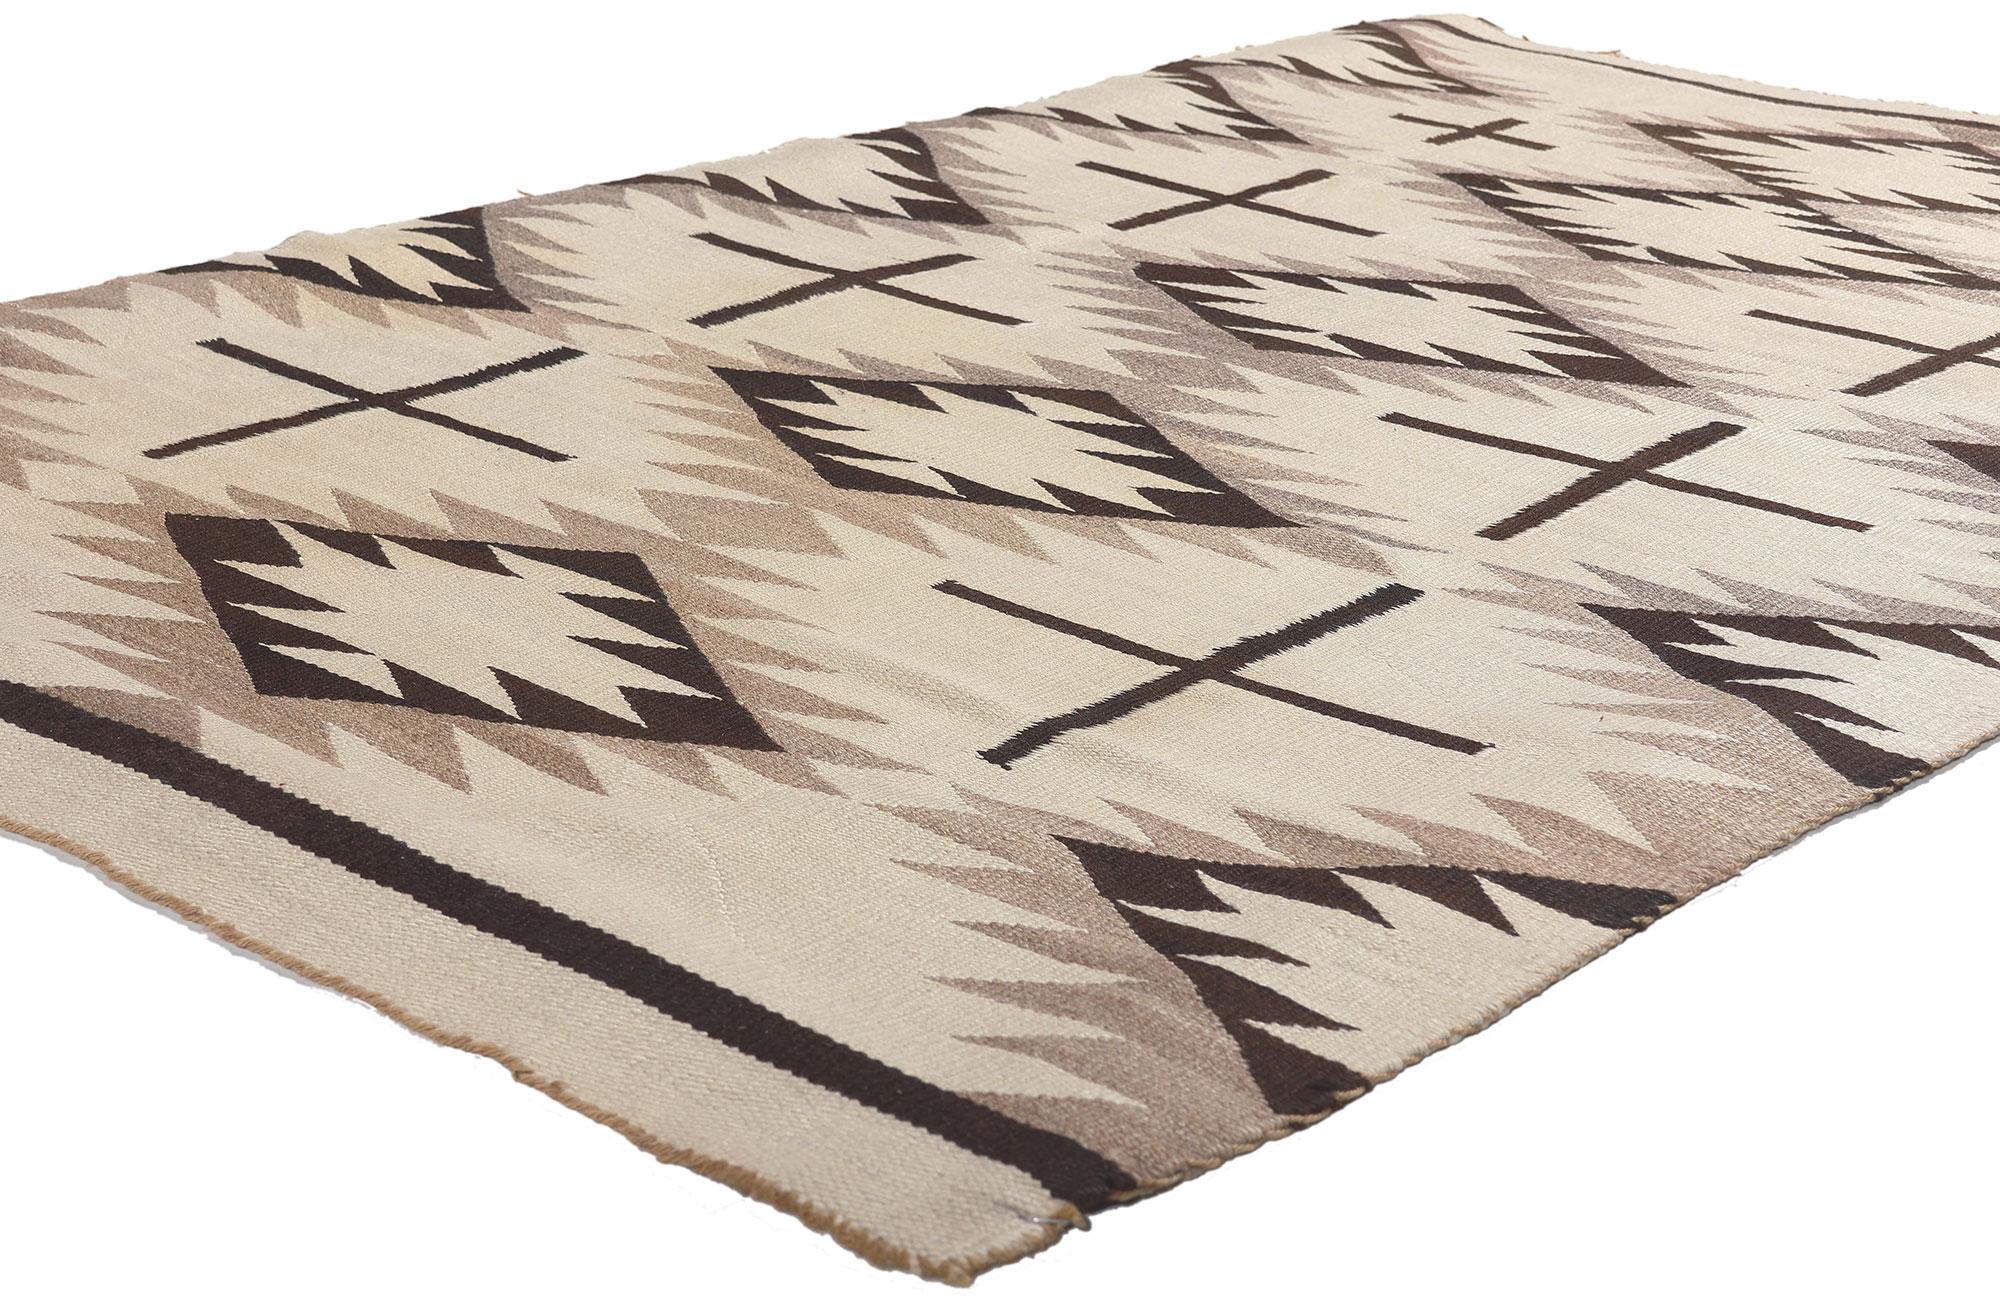 78611 Antique Neutral Crystal Navajo Rug, 03'09 x 05'10.
Emanating Native American style with incredible detail and texture, this handwoven Crystal Navajo rug is a captivating vision of woven beauty. The eye-catching geometric design and neutral